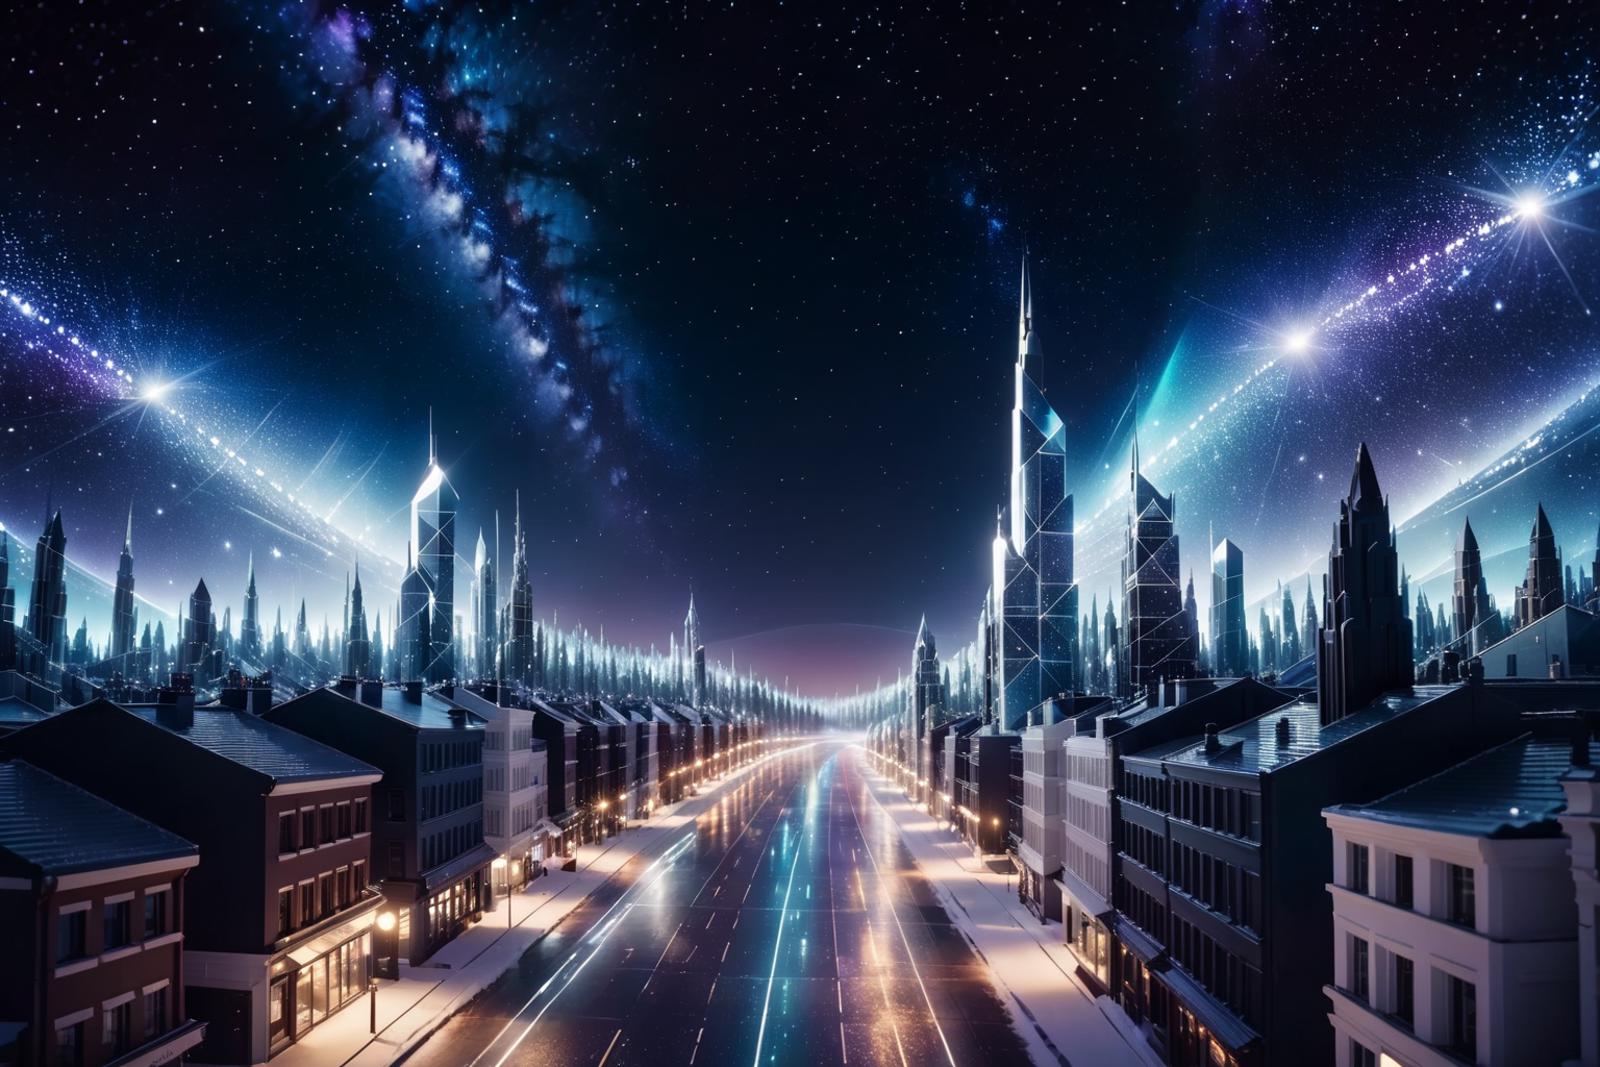 Futuristic city at night with neon lights and illuminated skyscrapers.